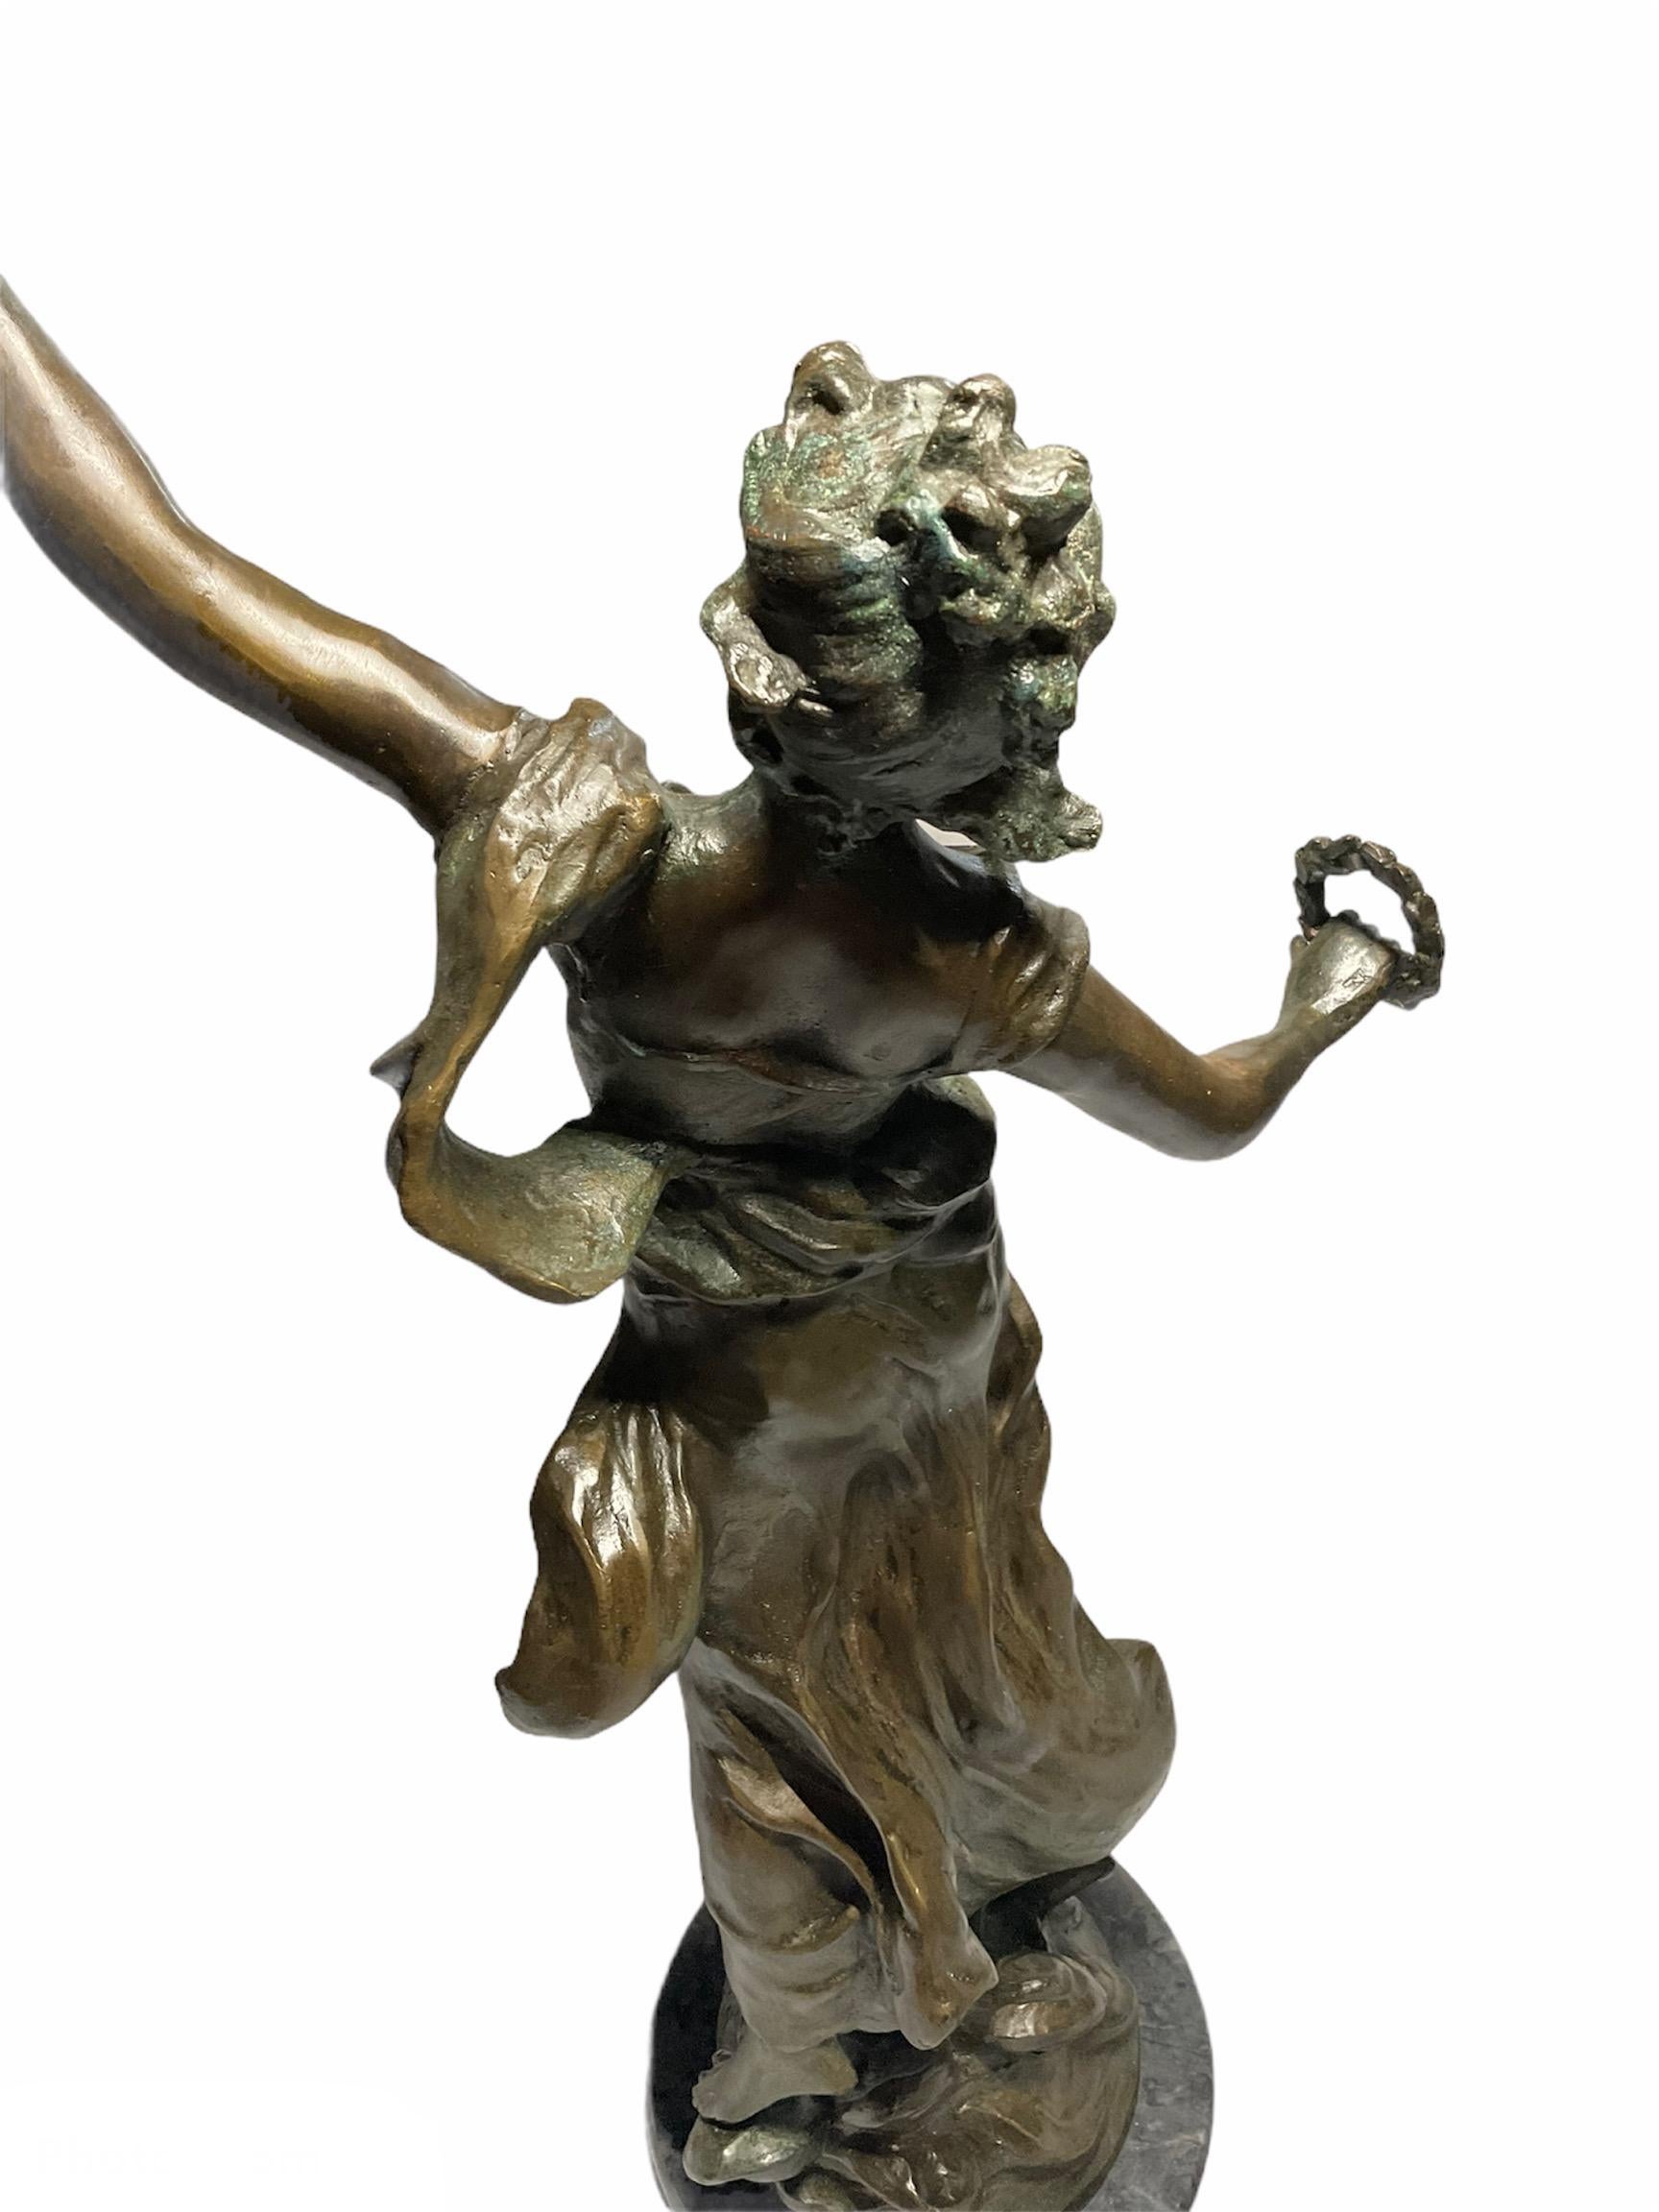 After brothers Louis & Francois Moreau, rare bronze sculpture of a maiden. In triumphant posture looking up to heaven, she is holding a wreath of laurel leaves in her right hand and a in the left one that is raised, a bouquet of flowers. She is